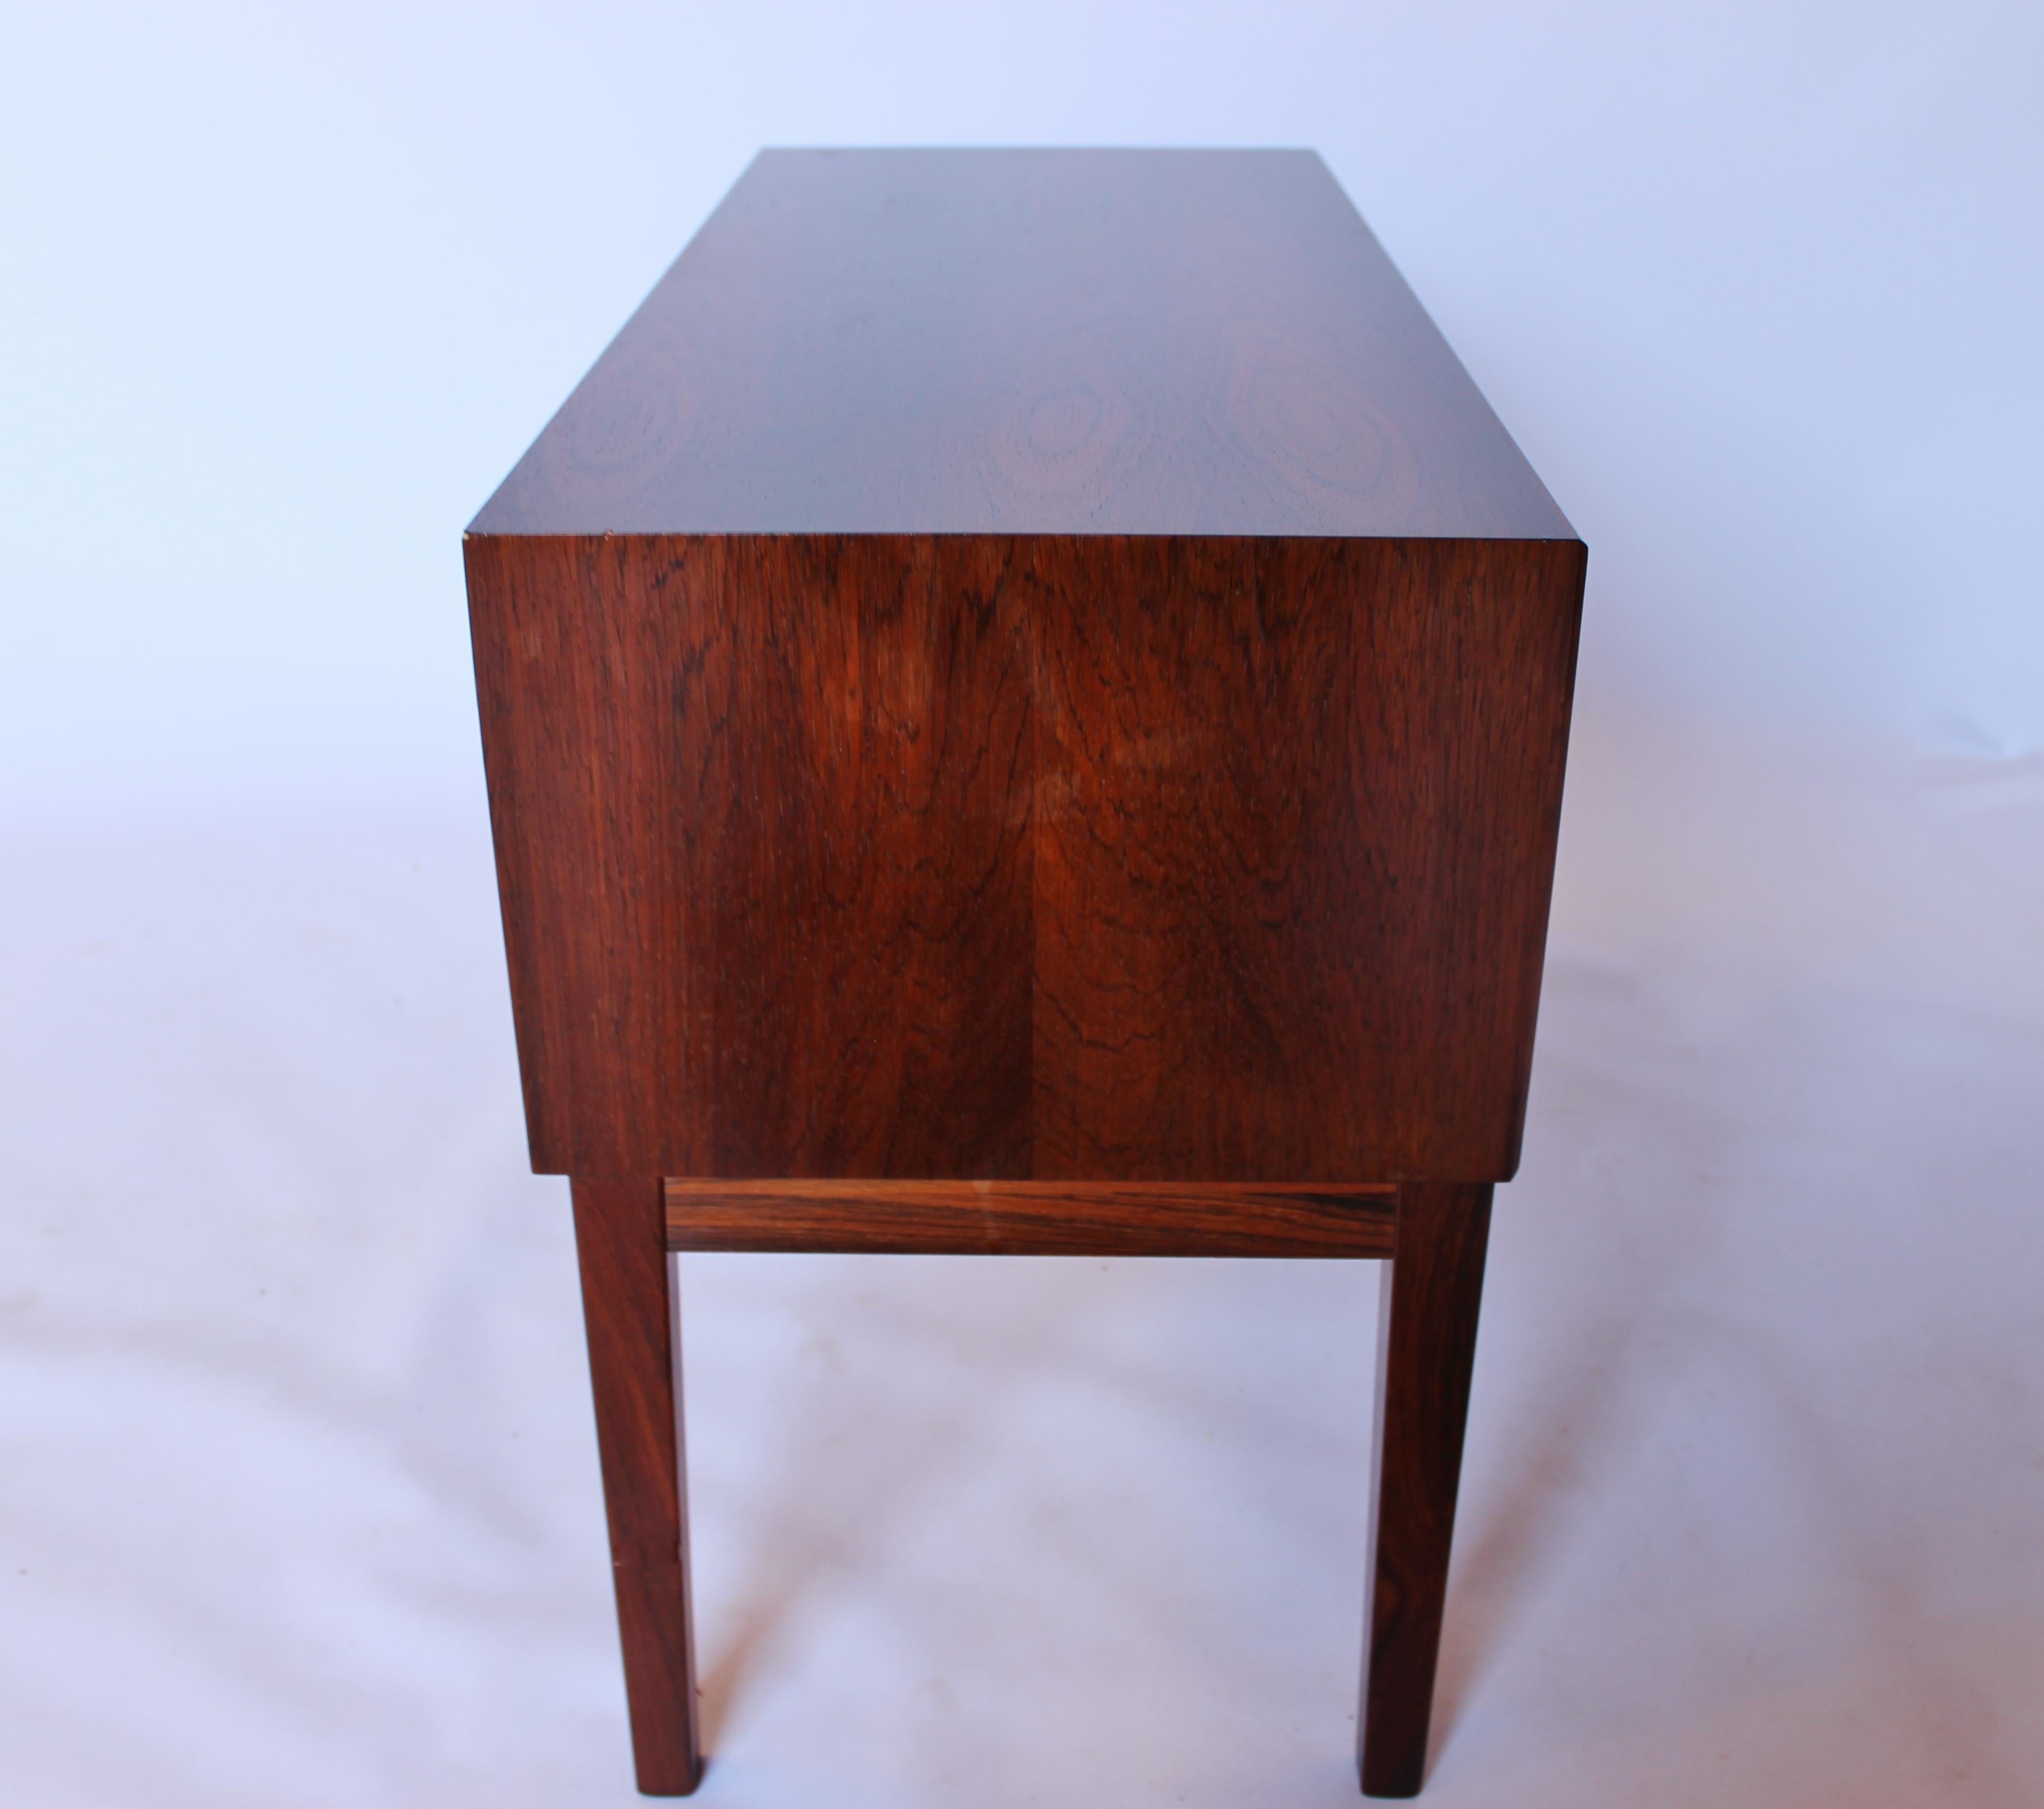 Scandinavian Modern Smaller Dresser with Two Drawers in Rosewood of Danish Design from the 1960s For Sale